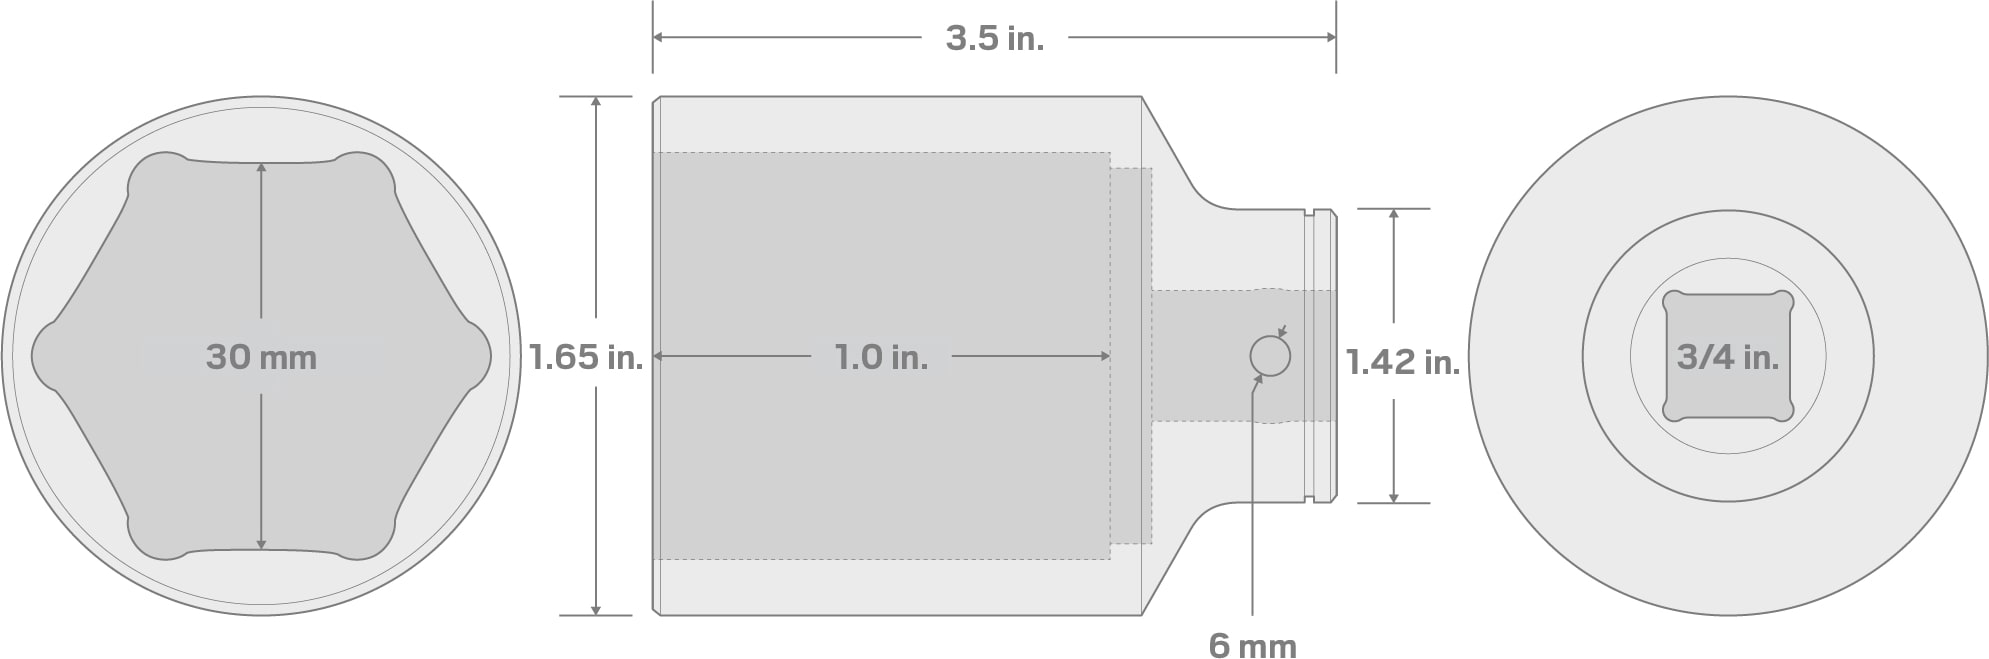 Specs for 3/4 Inch Drive x 30 mm Deep 6-Point Socket